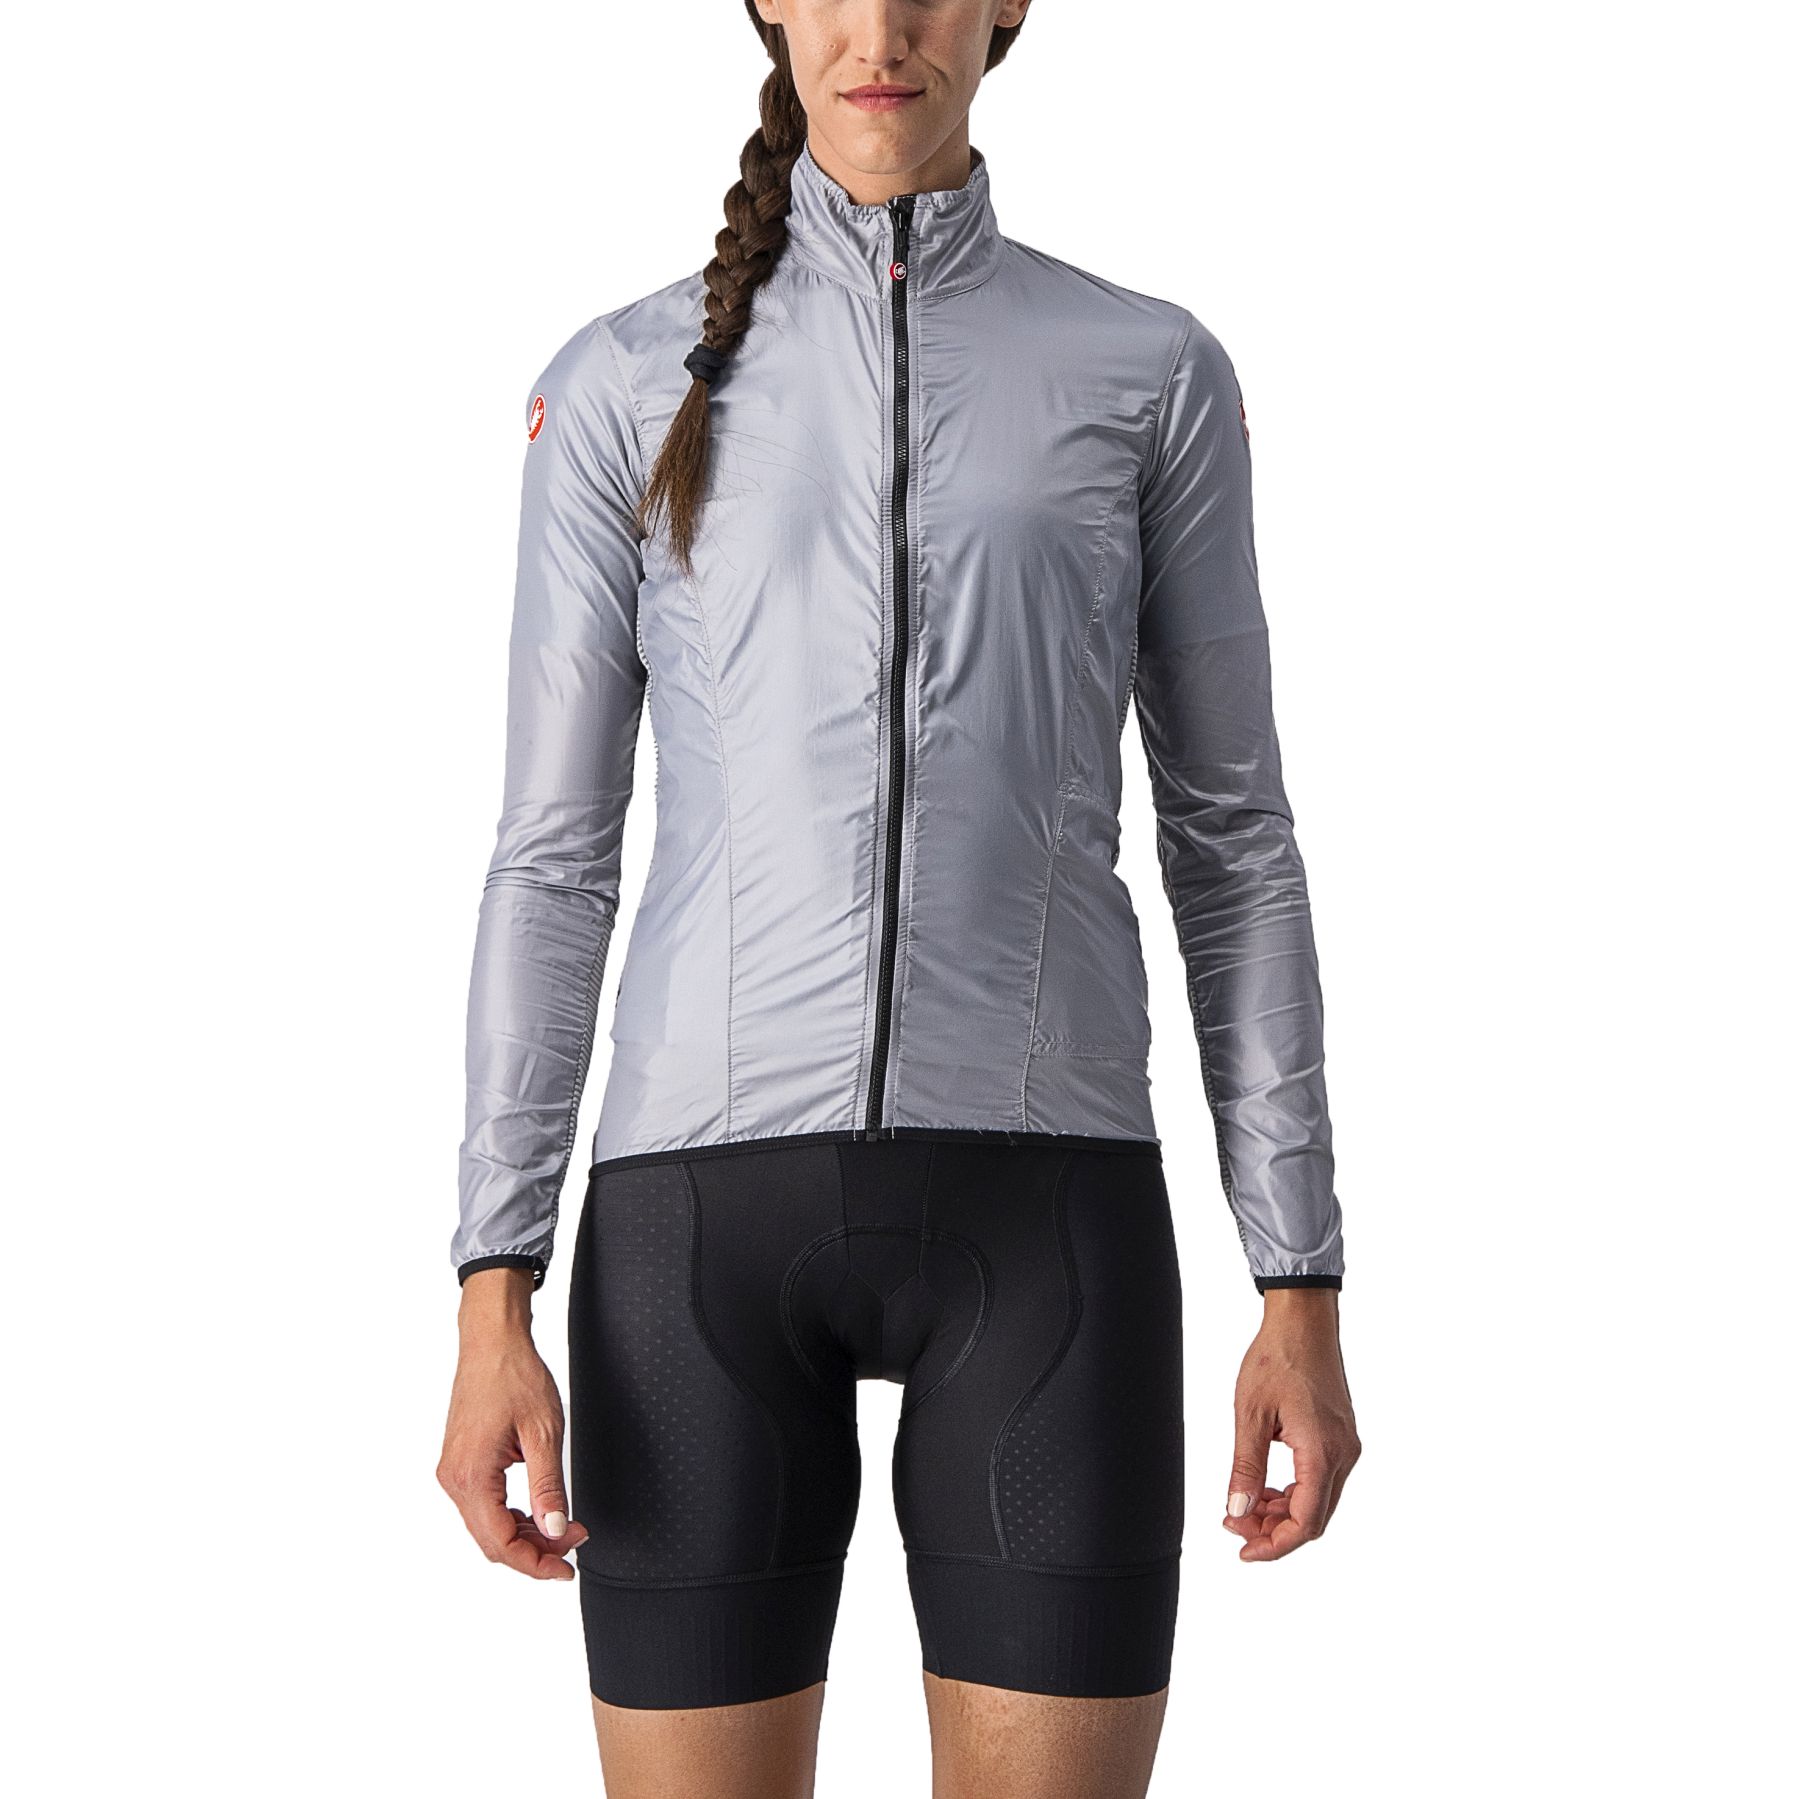 Picture of Castelli Aria Shell Jacket Women - silver grey 870